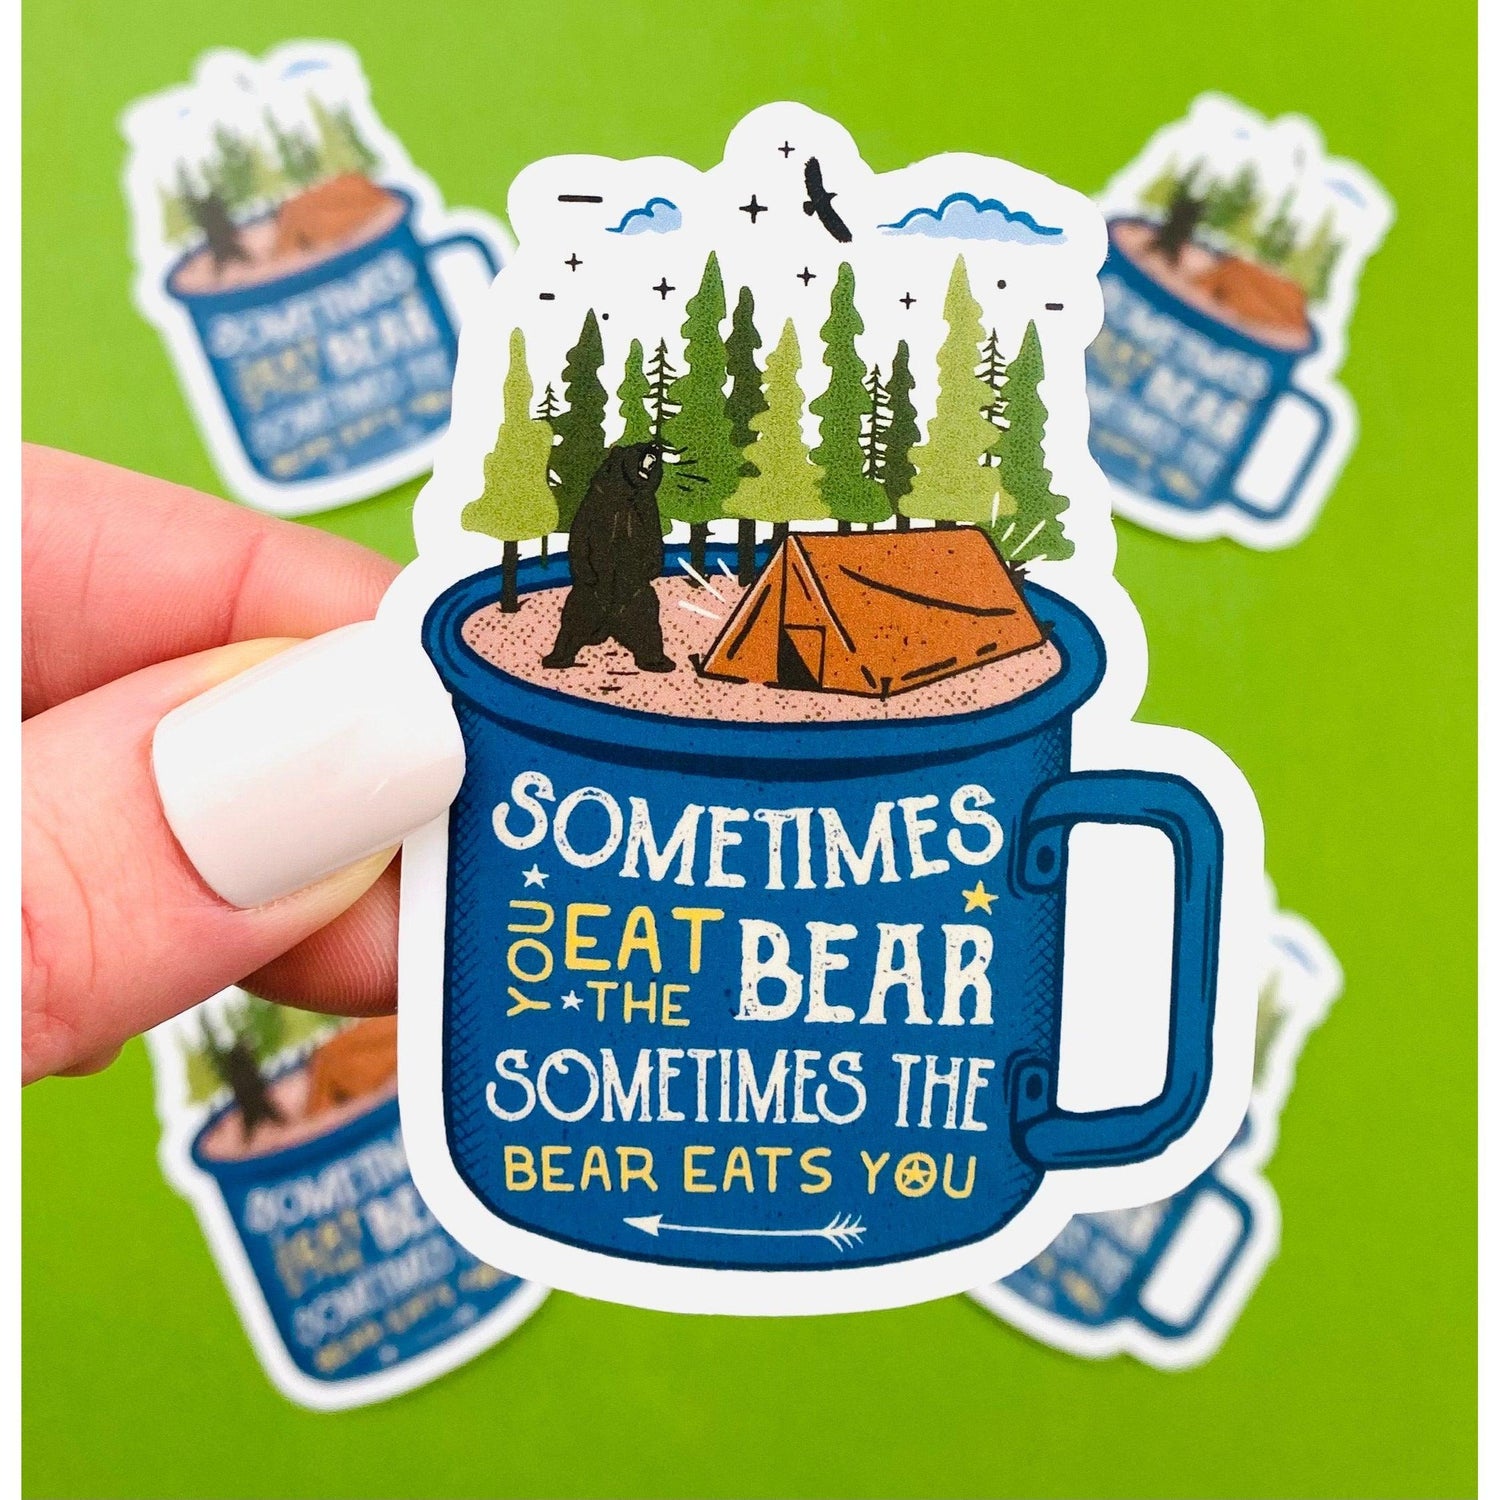 Camping Sticker Forest Sticker Hiking Sticker Bear in the Woods Sticker for Hikers - Sometimes You Eat The Bear, Sometimes The Bear Eats You - Ottos Grotto :: Stickers For Your Stuff